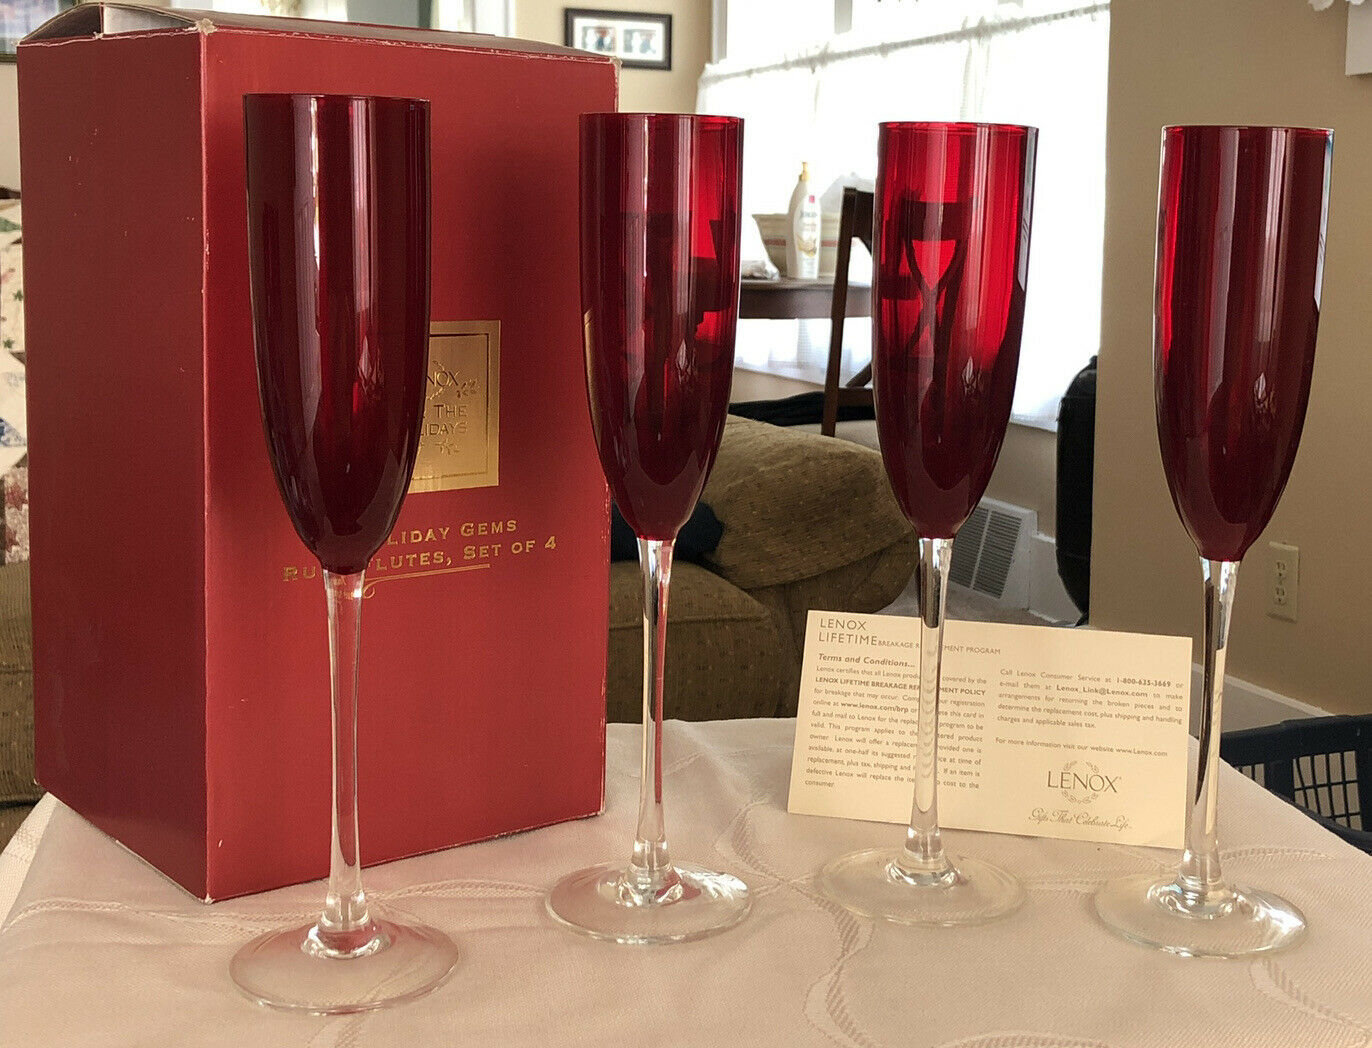 Lenox Red Ruby Champagne Flutes Glasses Set Of 4 Holiday Gems